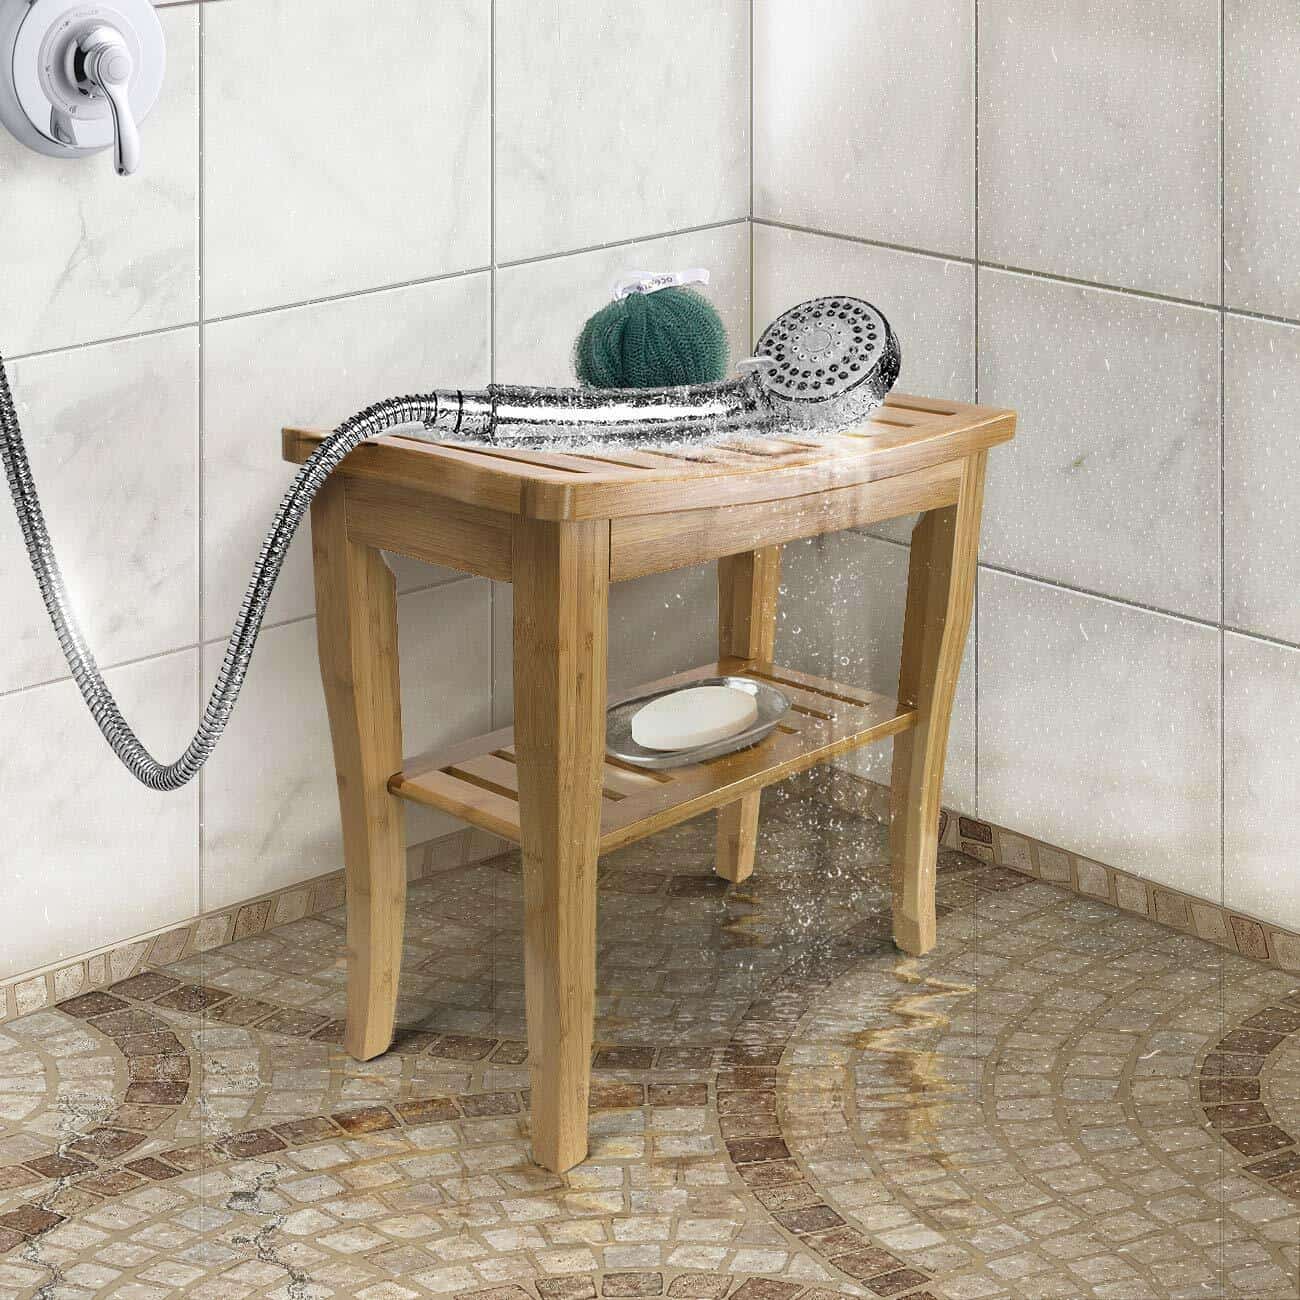 A wooden shower bench with a shower head on it.